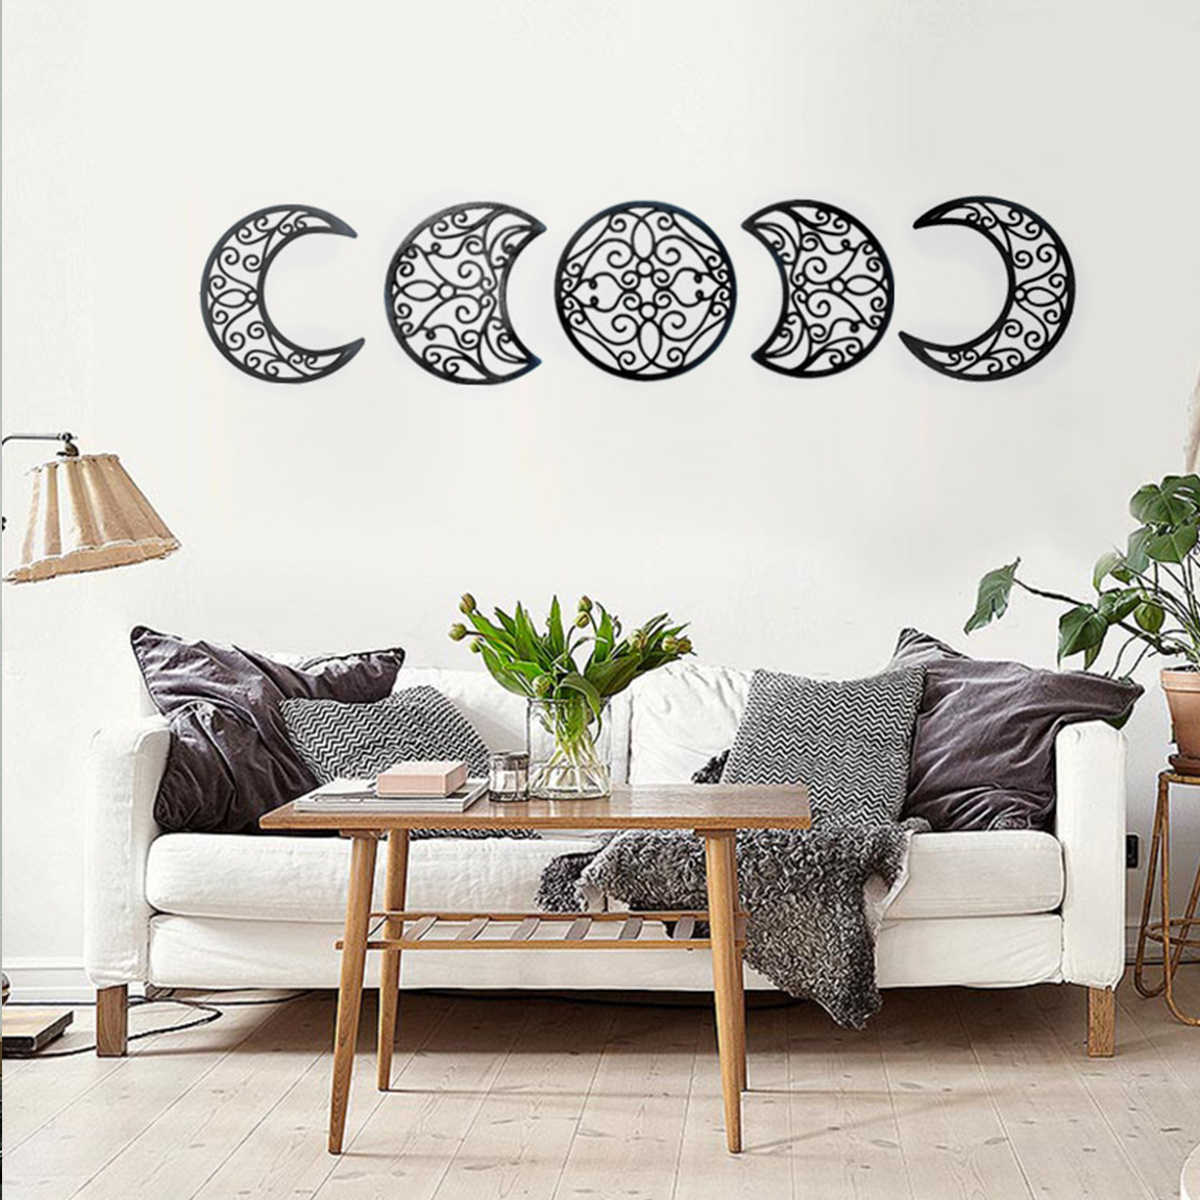 Everso 5Pcs Wooden Frame MoonPhase Wall Sticker,Moon Phase Wall Decorations,Wooden  Moon Phases Wall Hanging Home Decor Background Gift